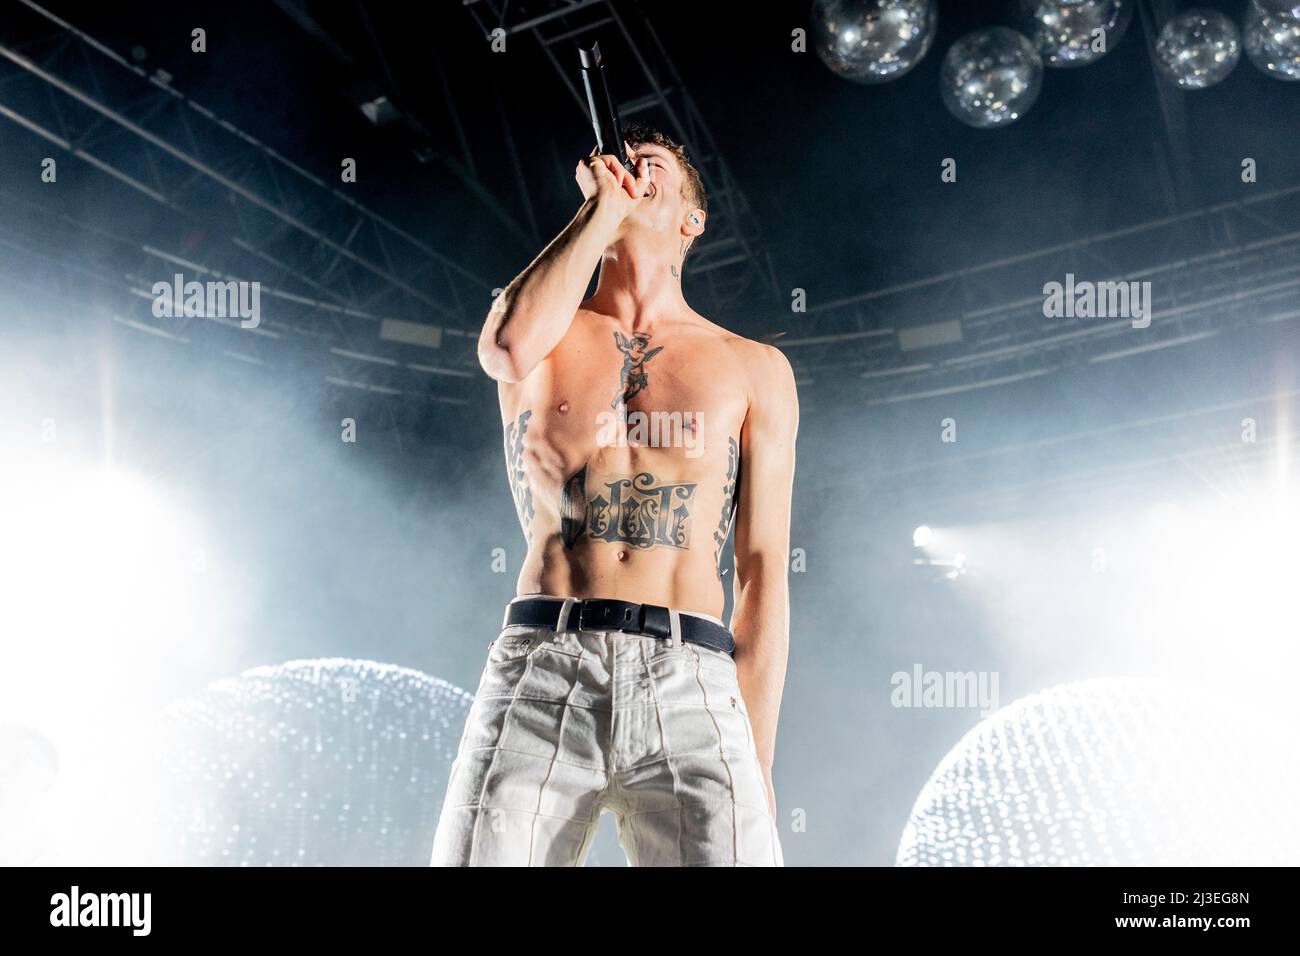 Milan, Italy. 07th Apr, 2022. The Italian singer Riccardo Fabbriconi aka Blanco live at the Fabrique club in Milan. (Photo by Andrea Ripamonti/Pacific Press) Credit: Pacific Press Media Production Corp./Alamy Live News Stock Photo